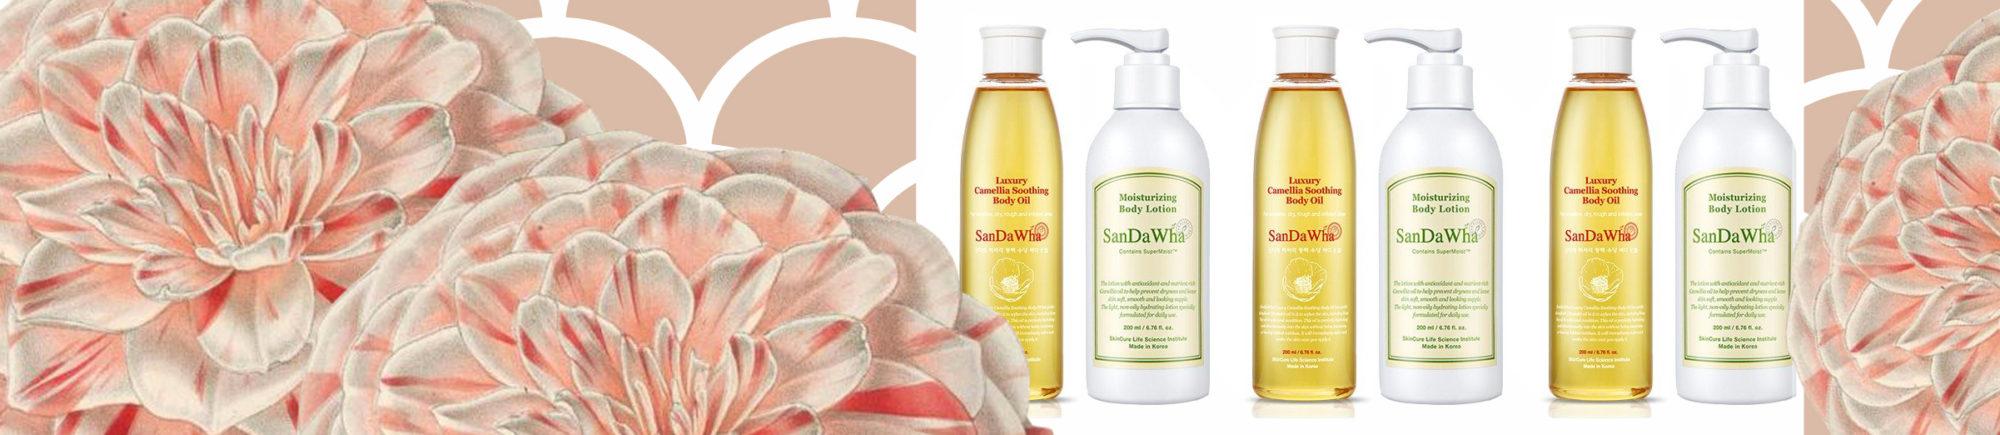 If You Hate Slippery, Oily, or Greasy, You’ll Love These SanDaWha Body Moisturizers